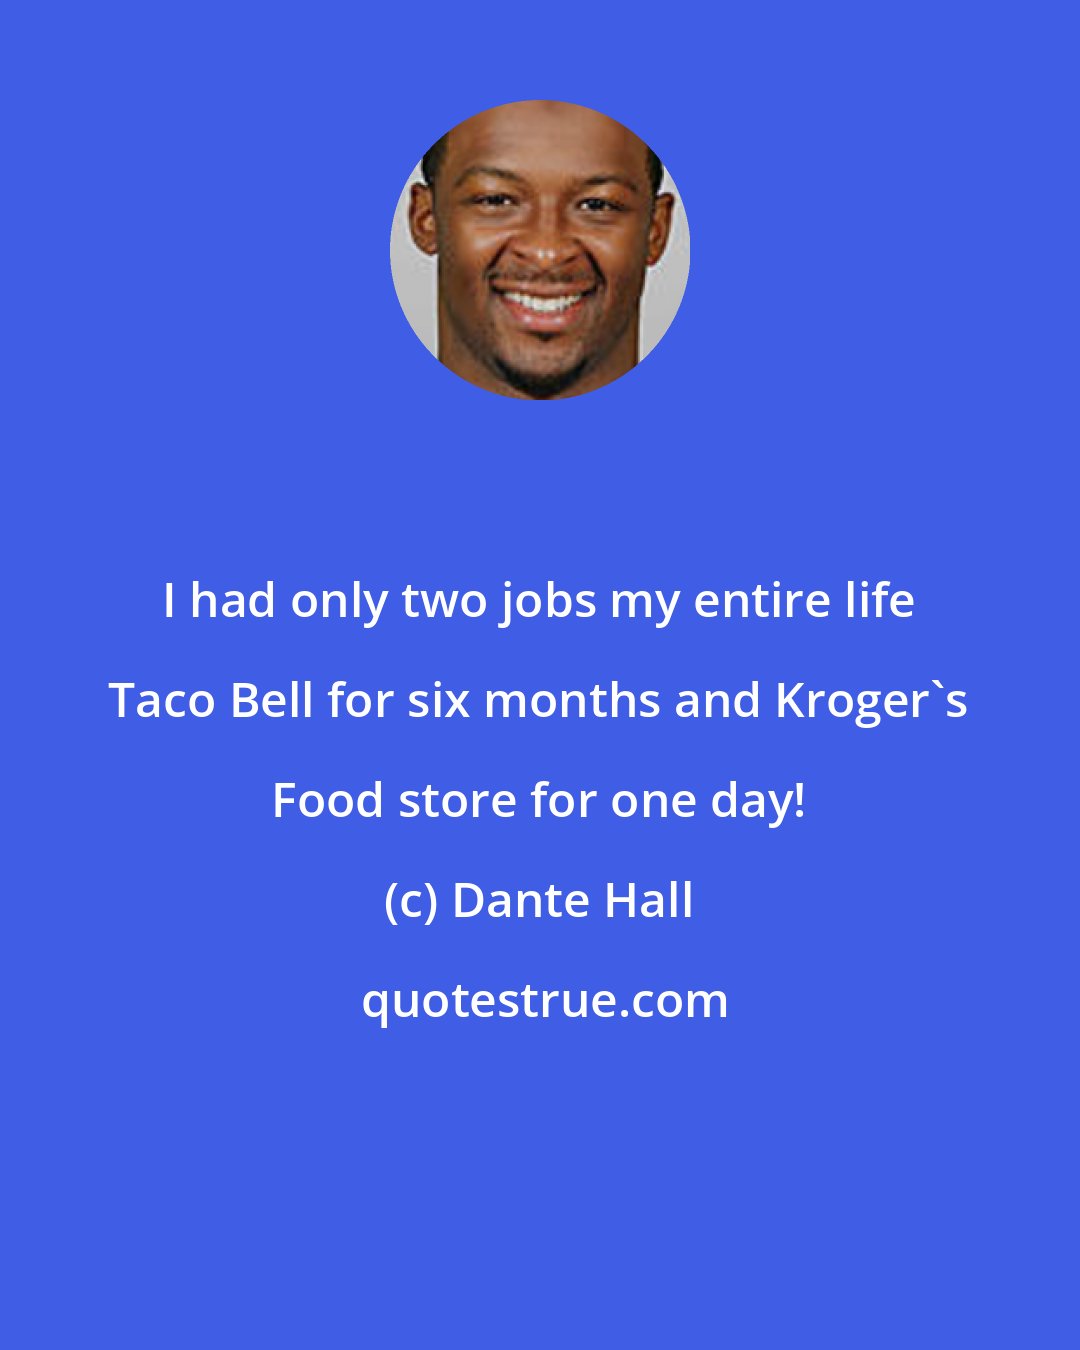 Dante Hall: I had only two jobs my entire life Taco Bell for six months and Kroger's Food store for one day!